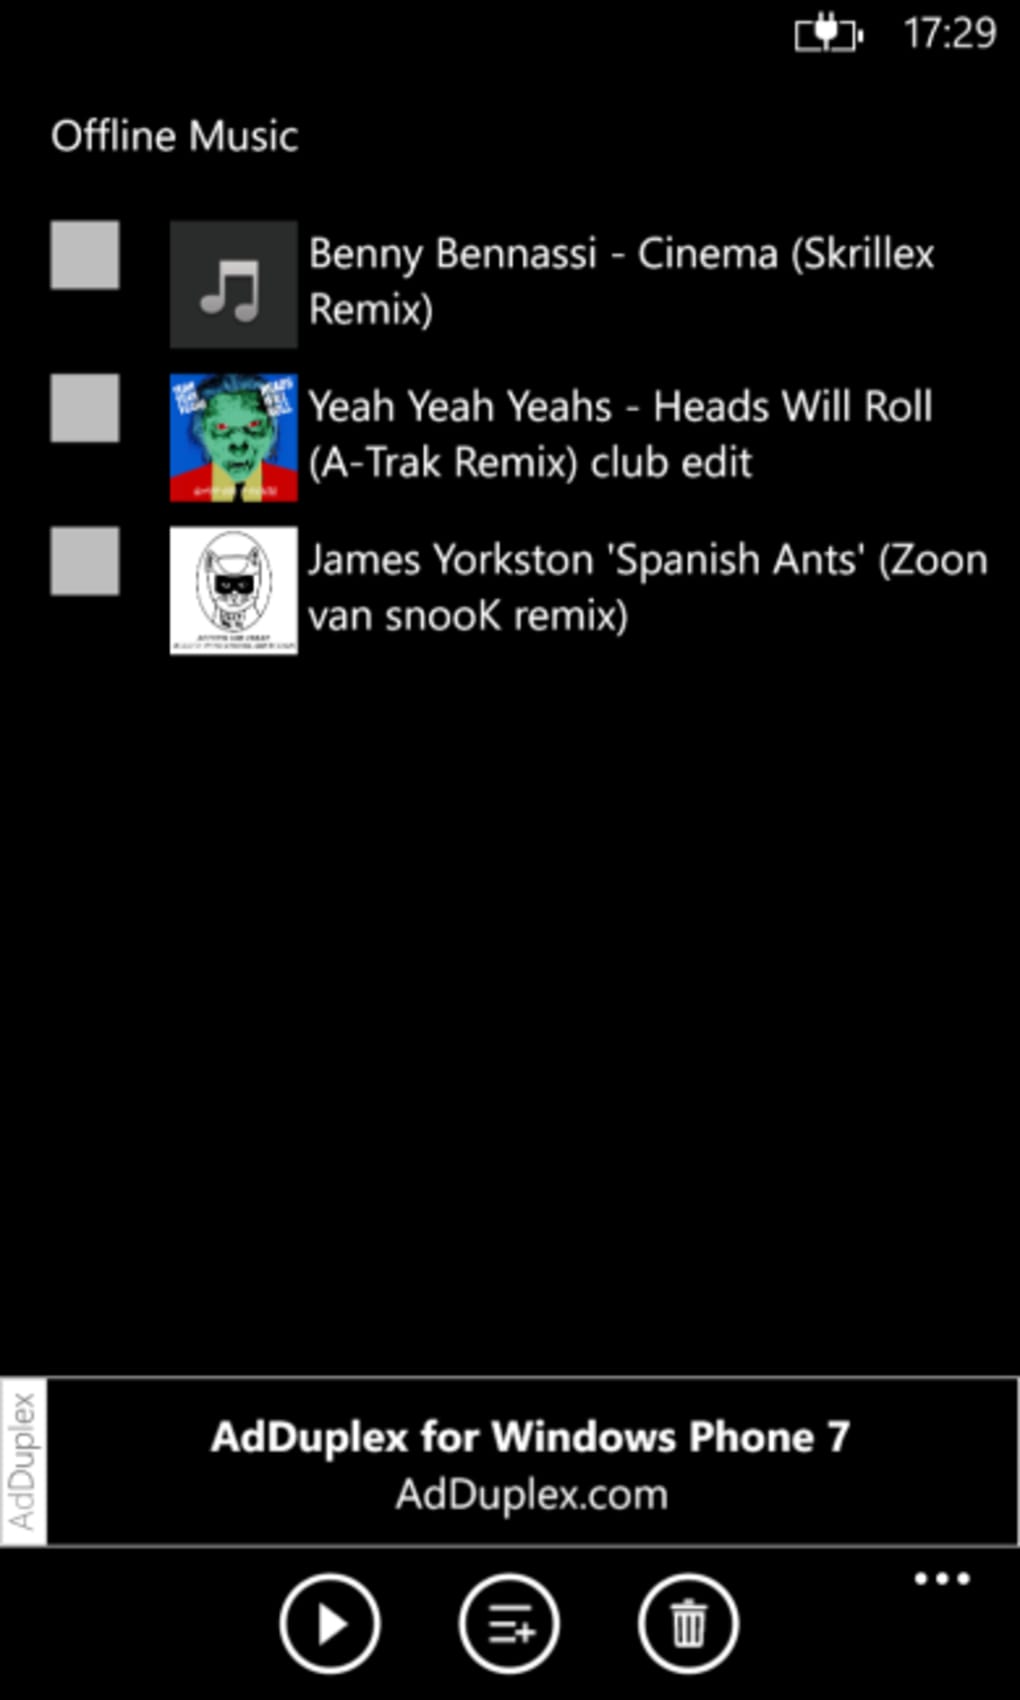 Download Songs For Windows Phone